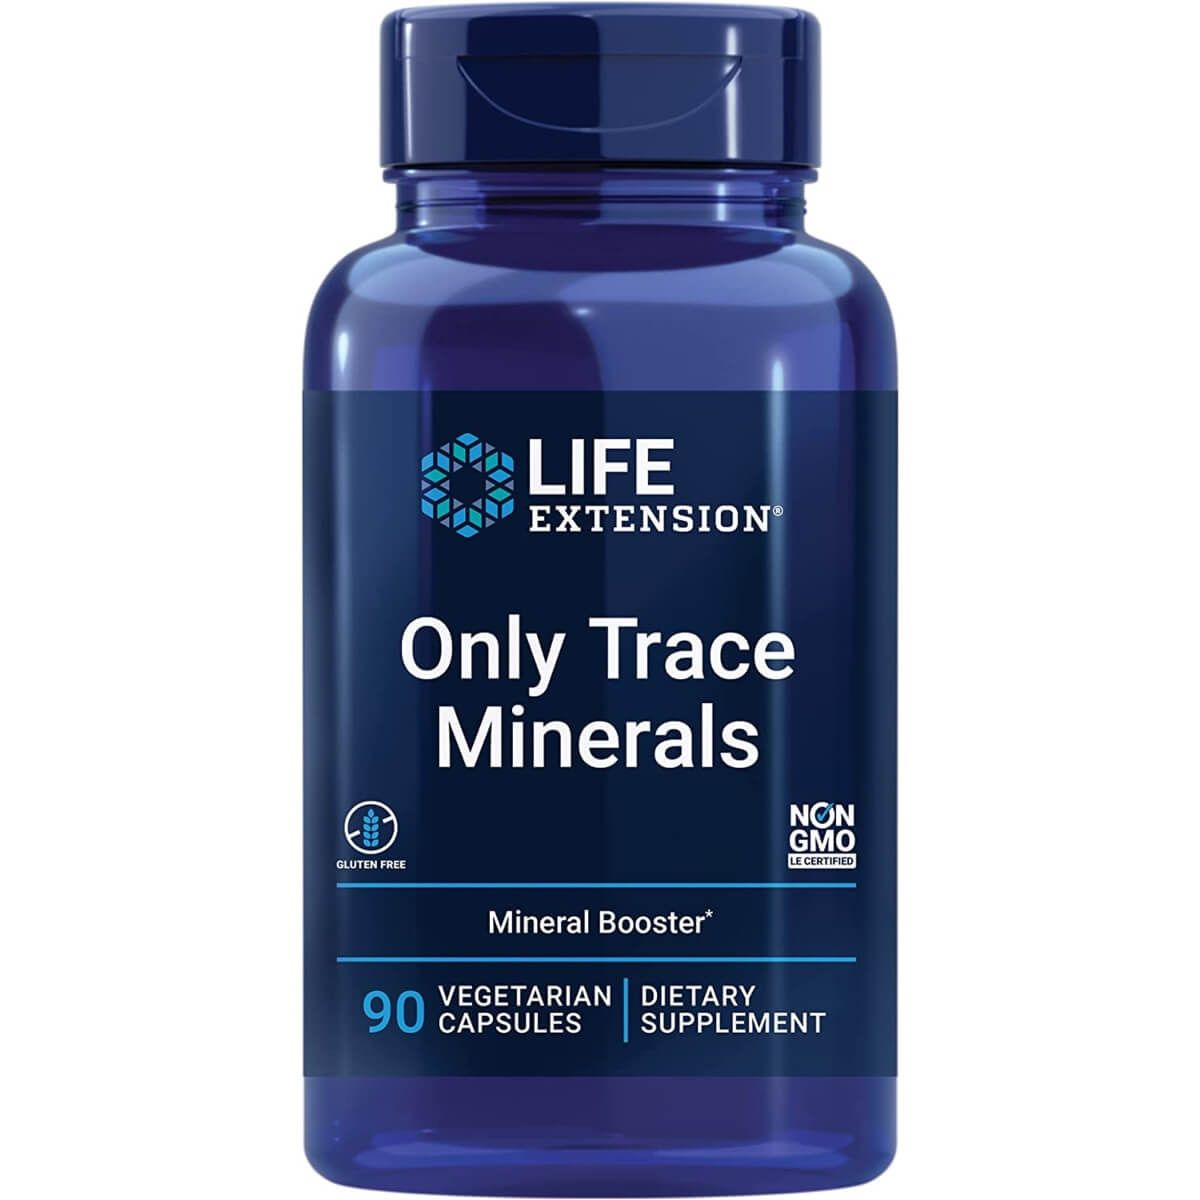 Photos - Vitamins & Minerals Life Extension Only Trace Minerals 90 Vegetarian Capsules PBW-P35771 